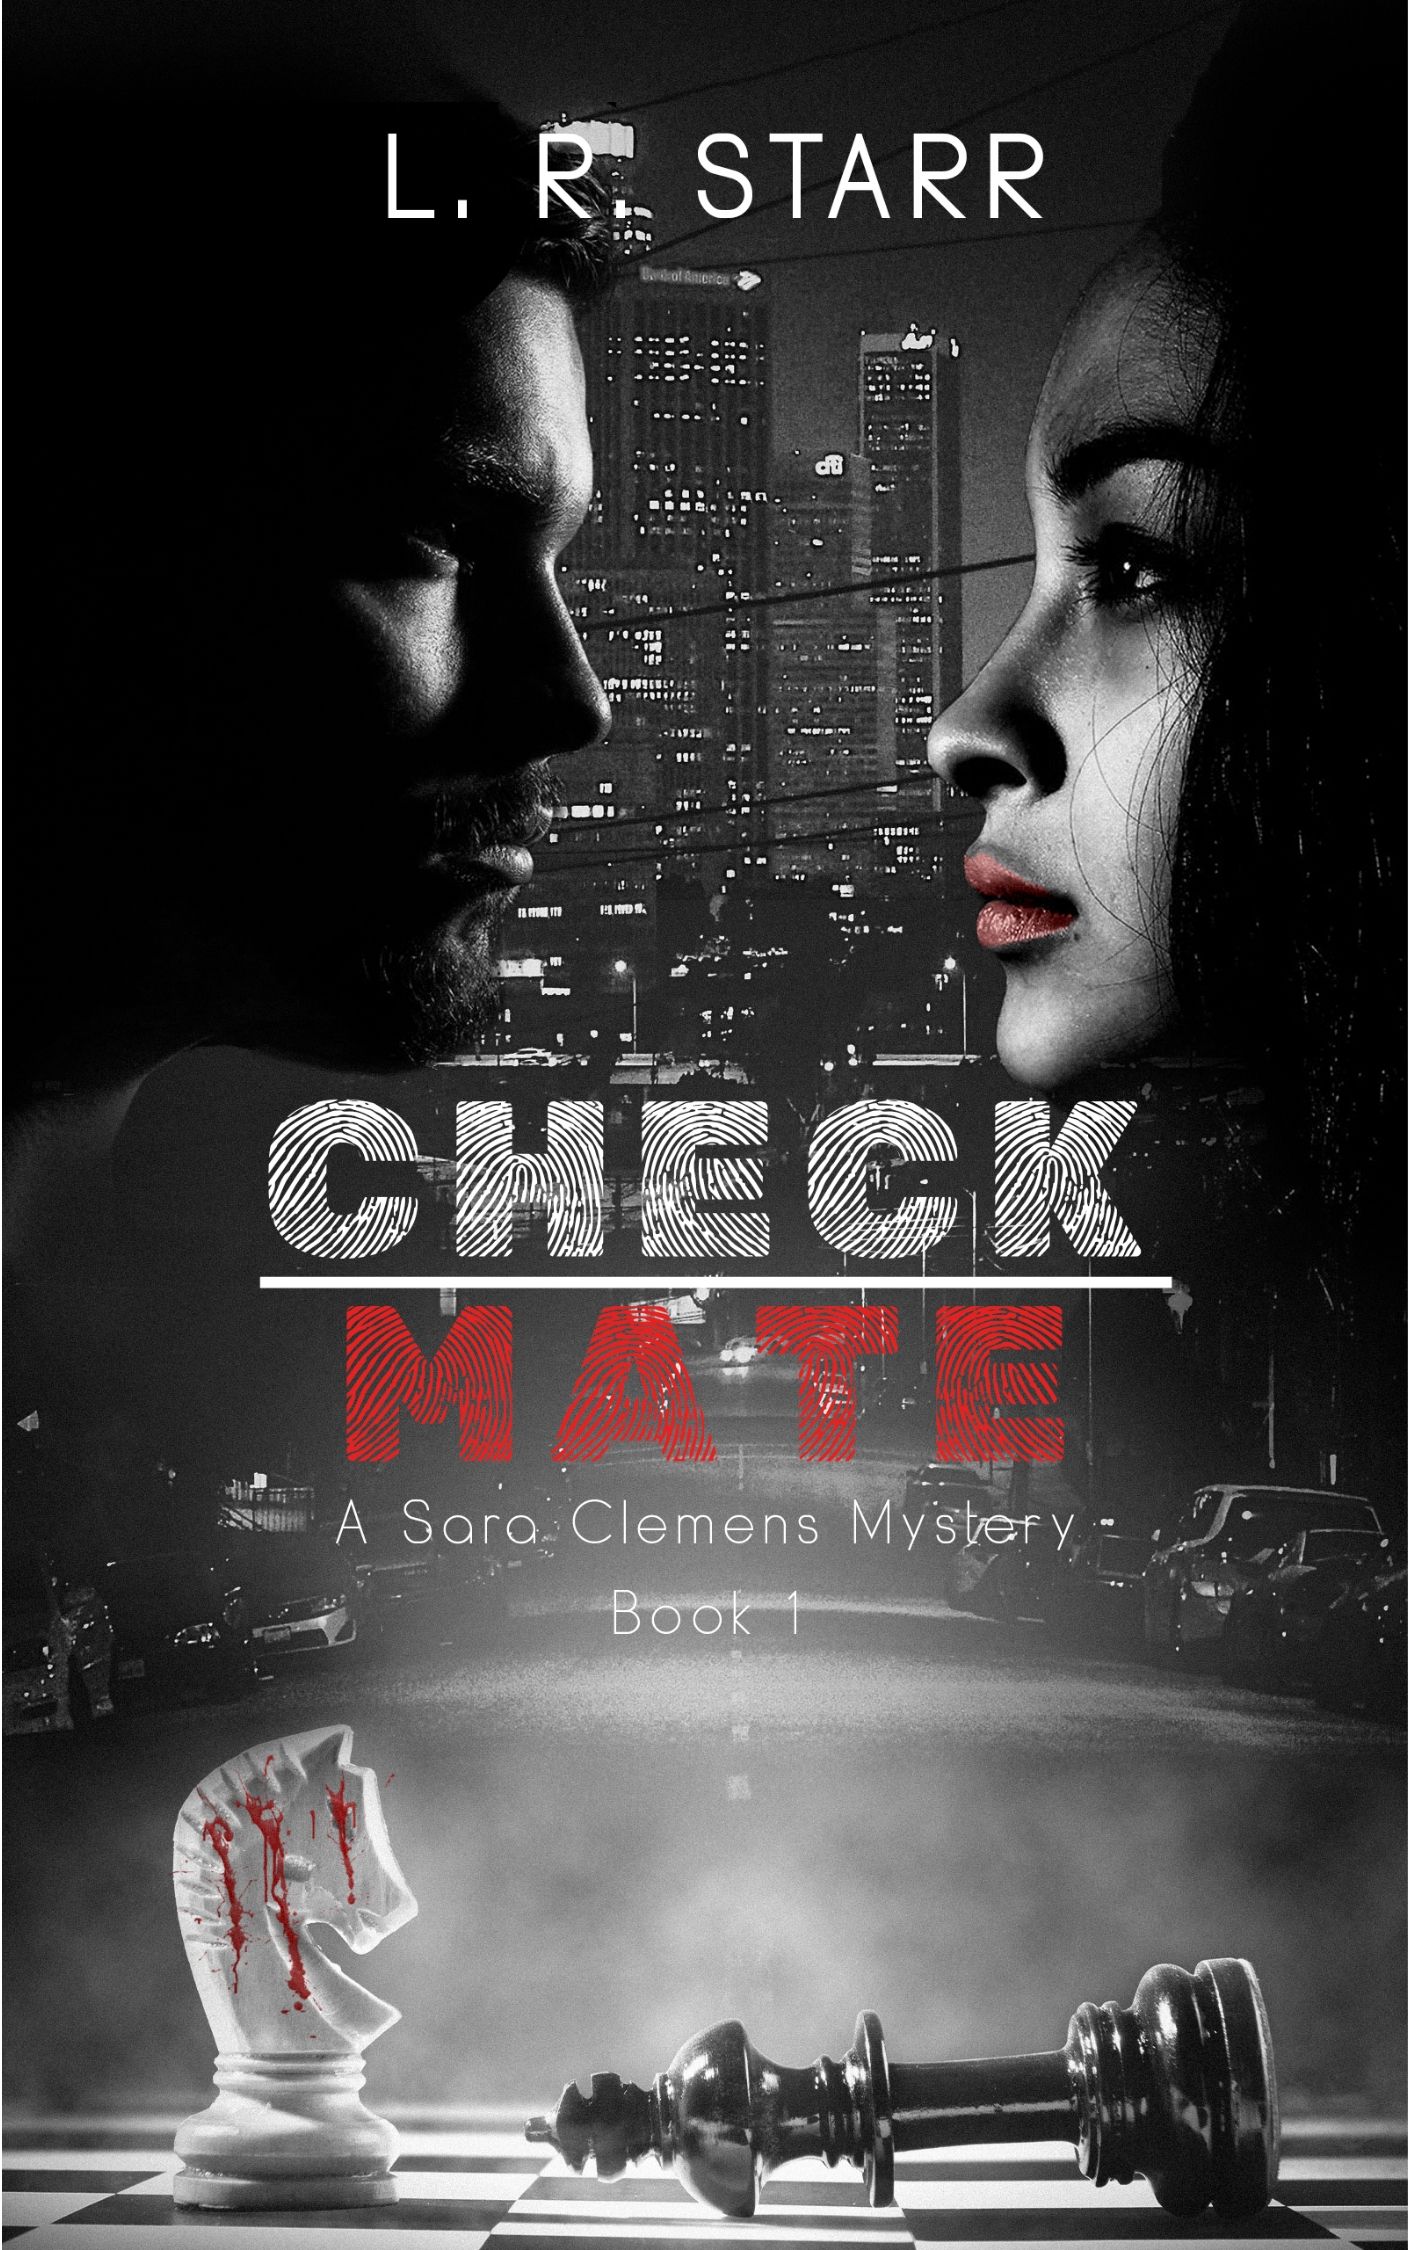 FREE: CheckMate (A Sara Clemens Mystery Book 1) by L.R. Starr